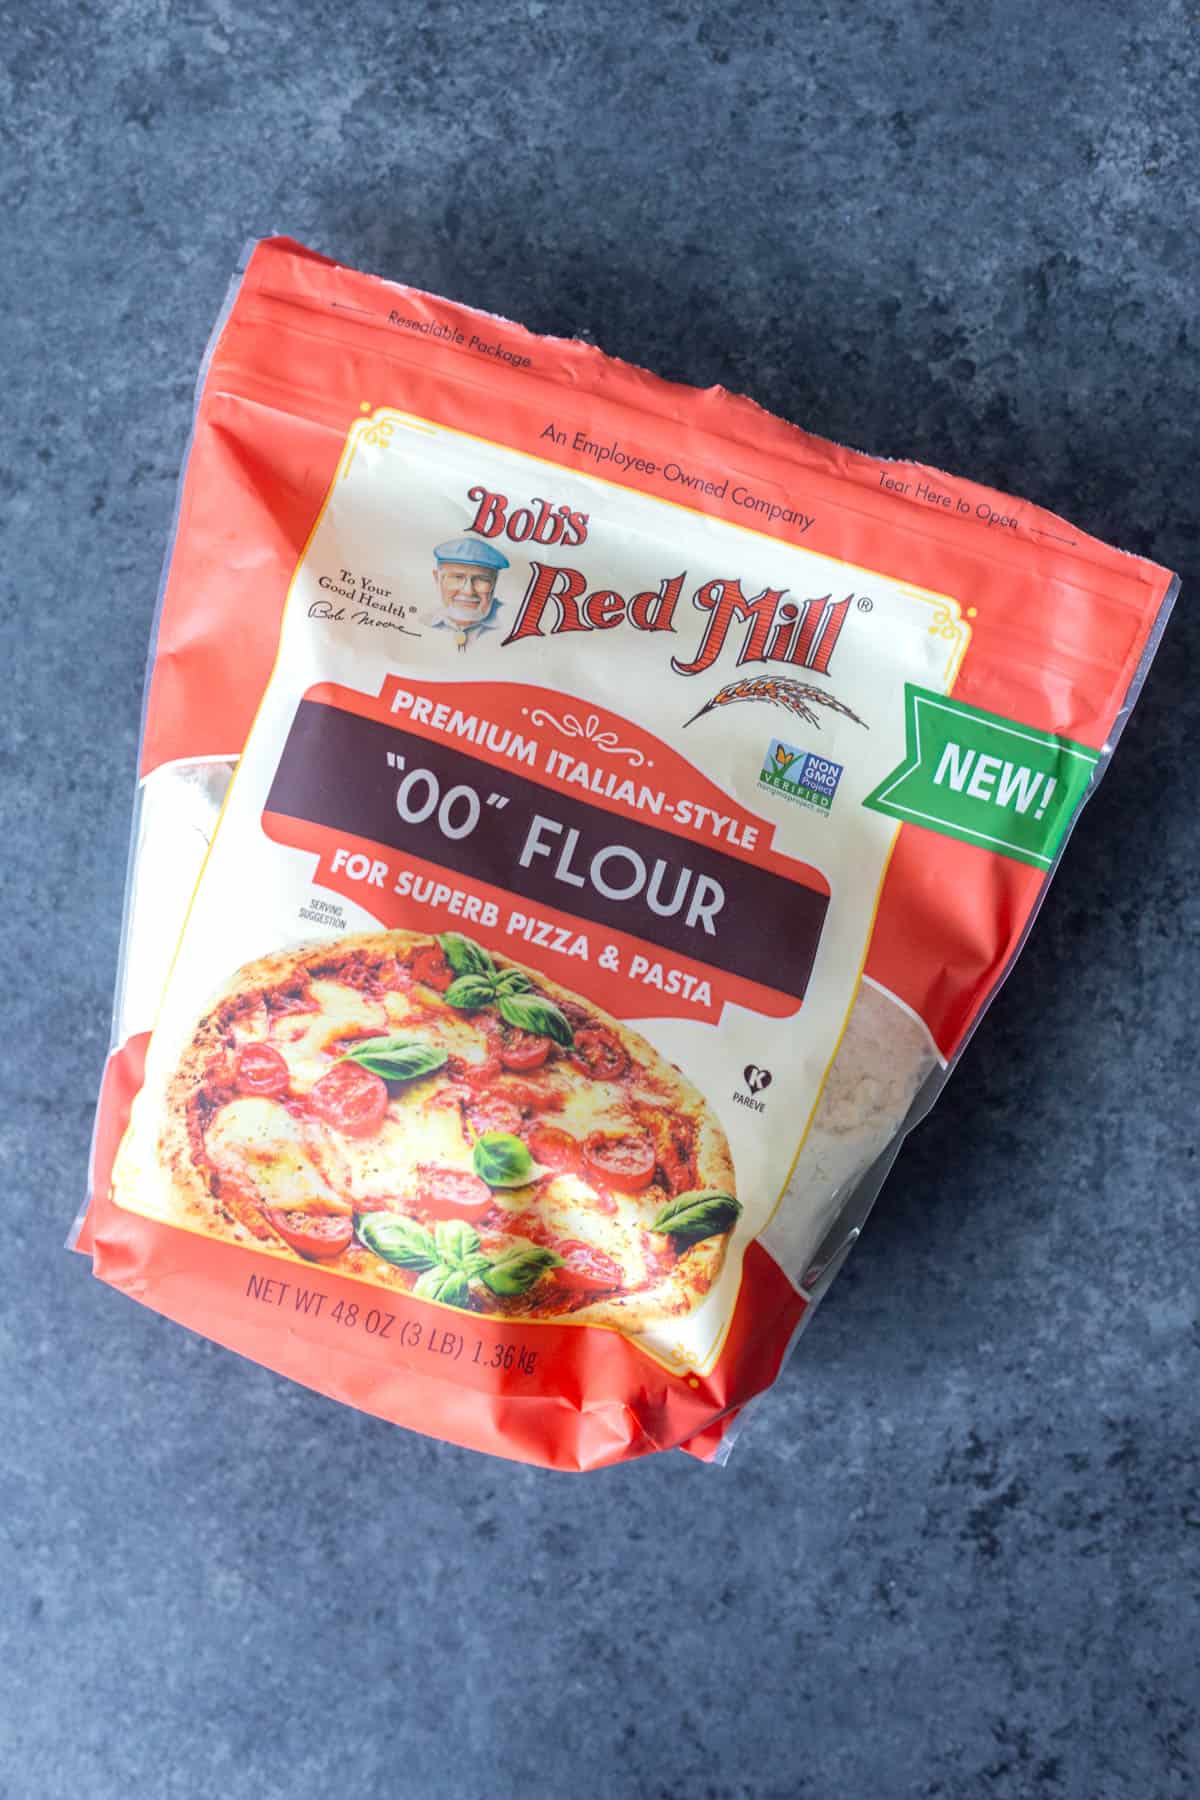 a bag of Bob's Red Mill's 00 Flour